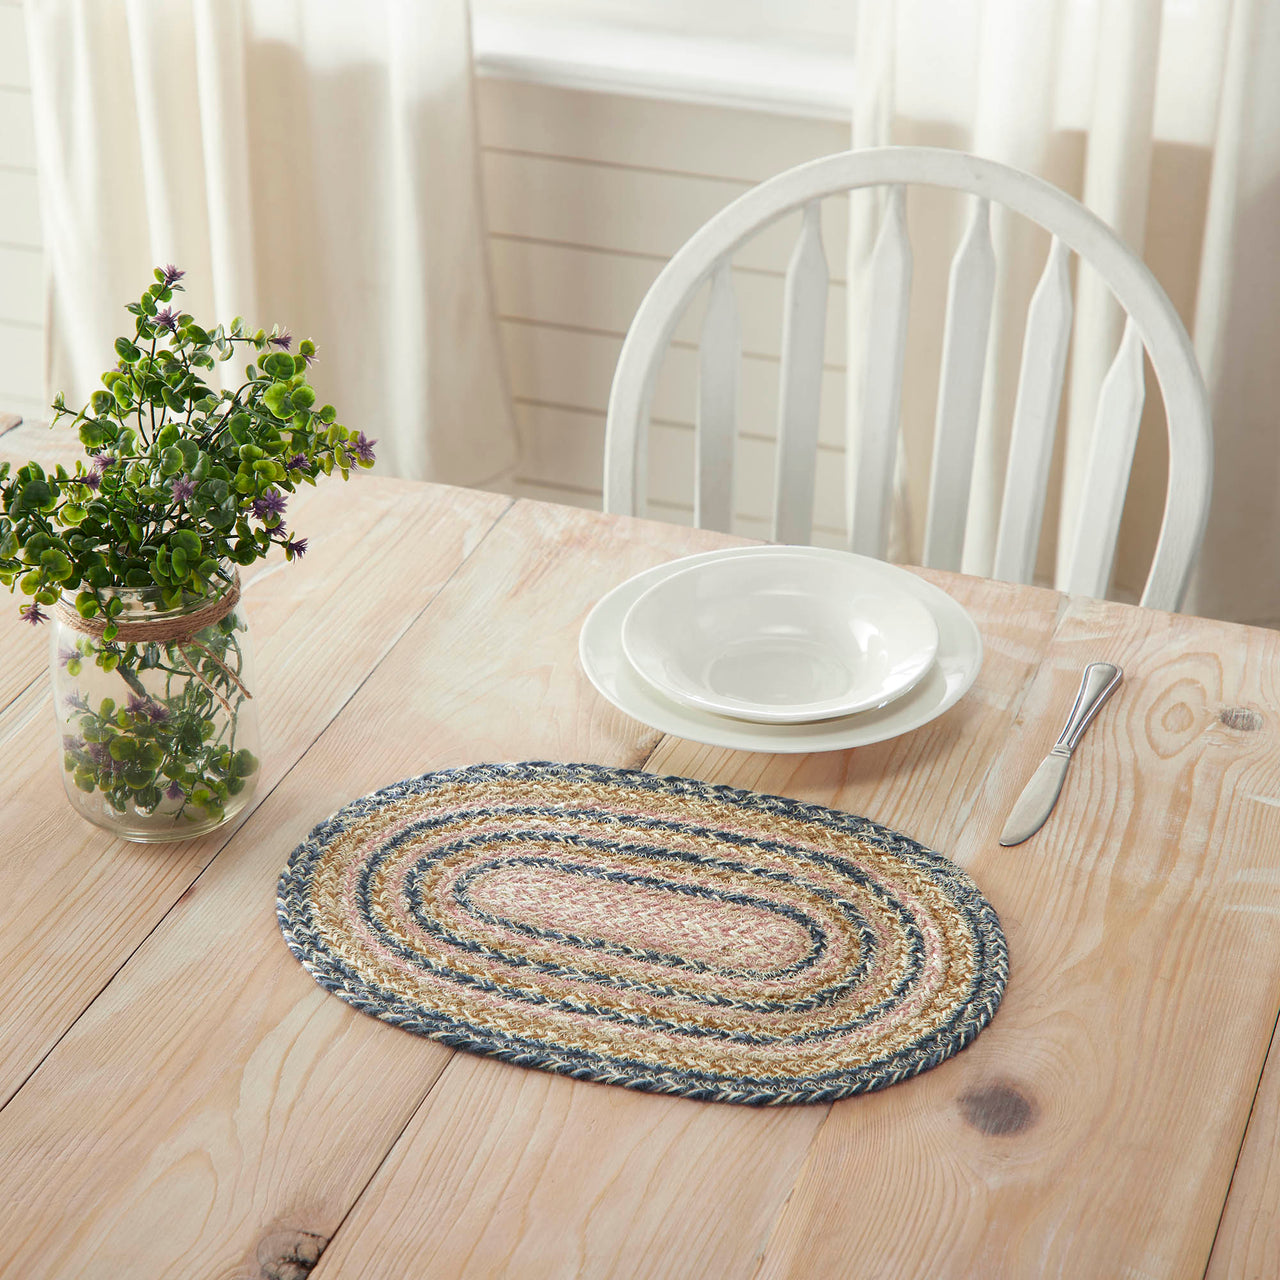 Kaila Jute Braided Oval Placemat 10"x15" VHC Brands